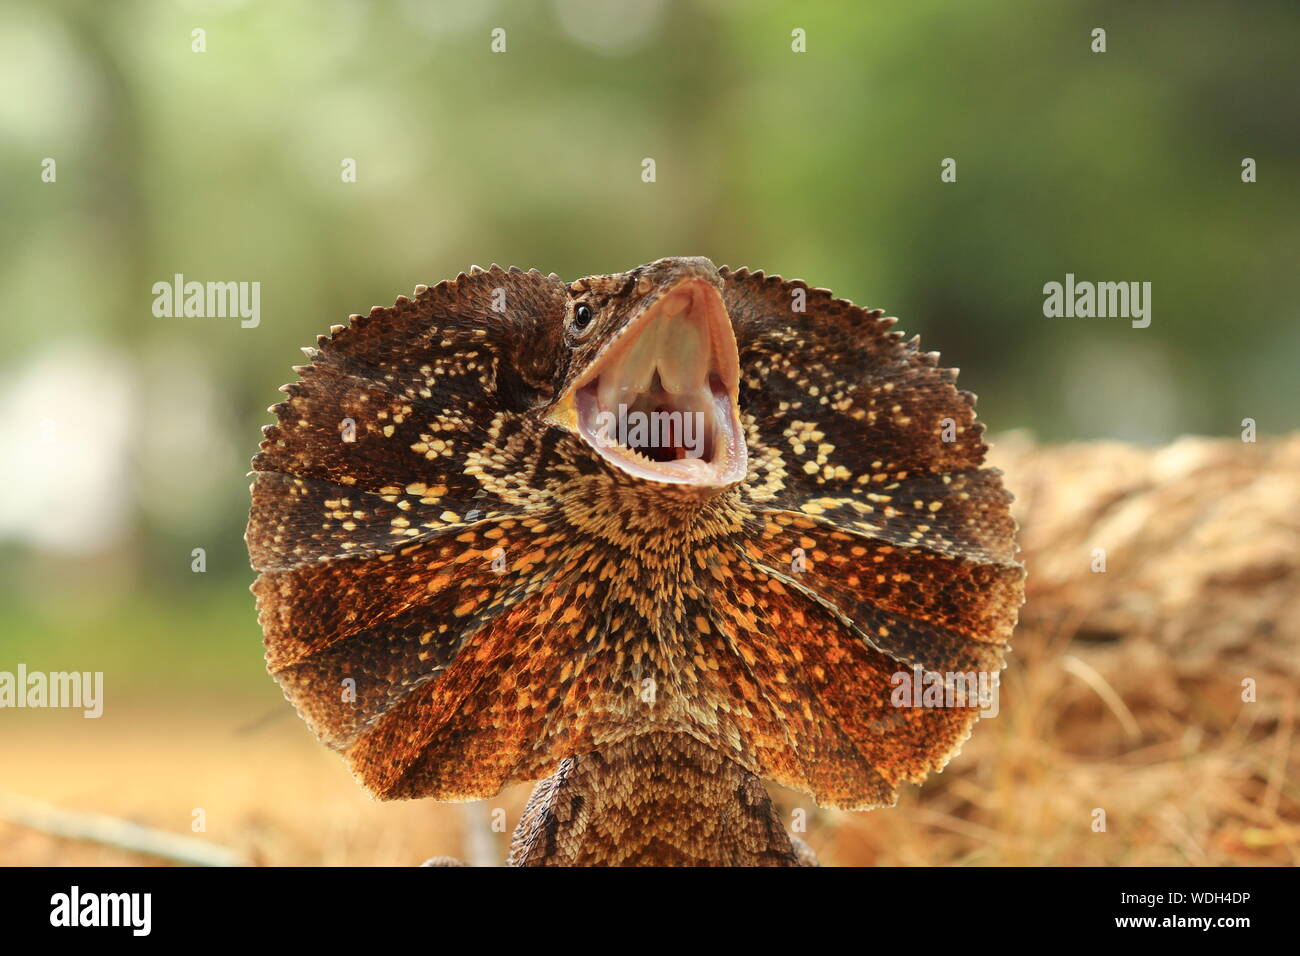 Close-up Of Frilled Lizard Stock Photo